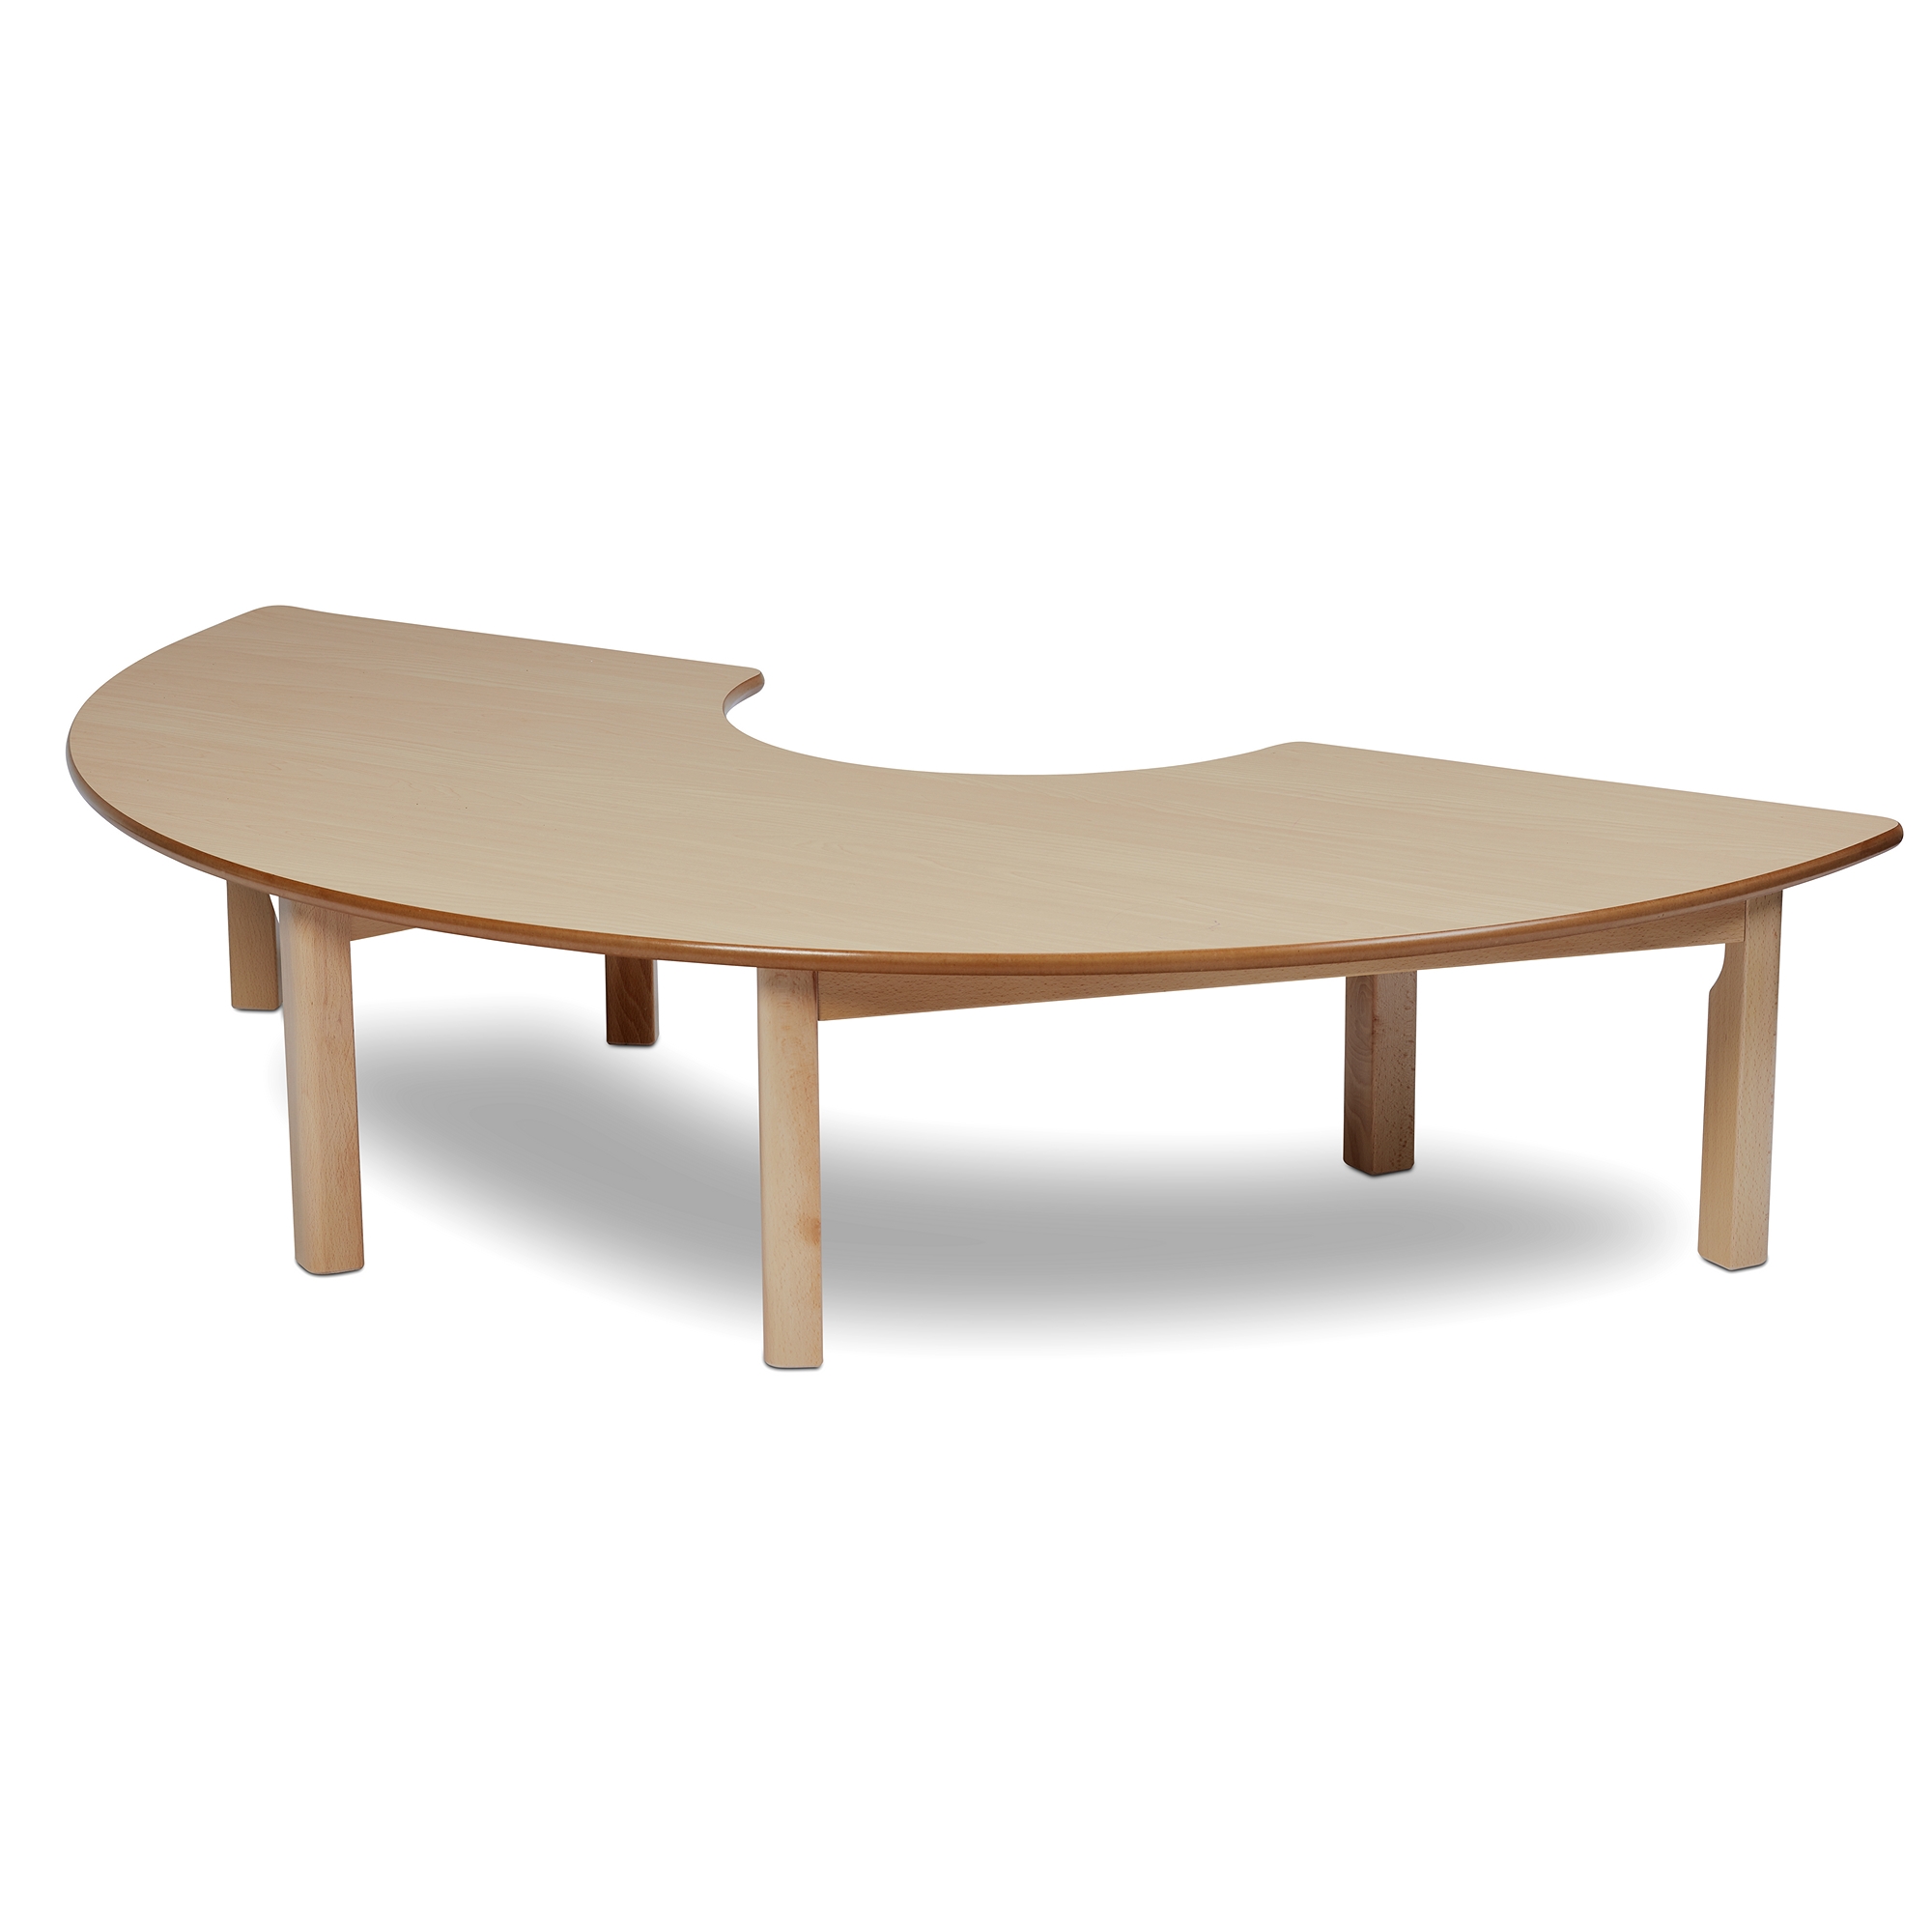 Playscapes Semi Circle Table - 400mm Height